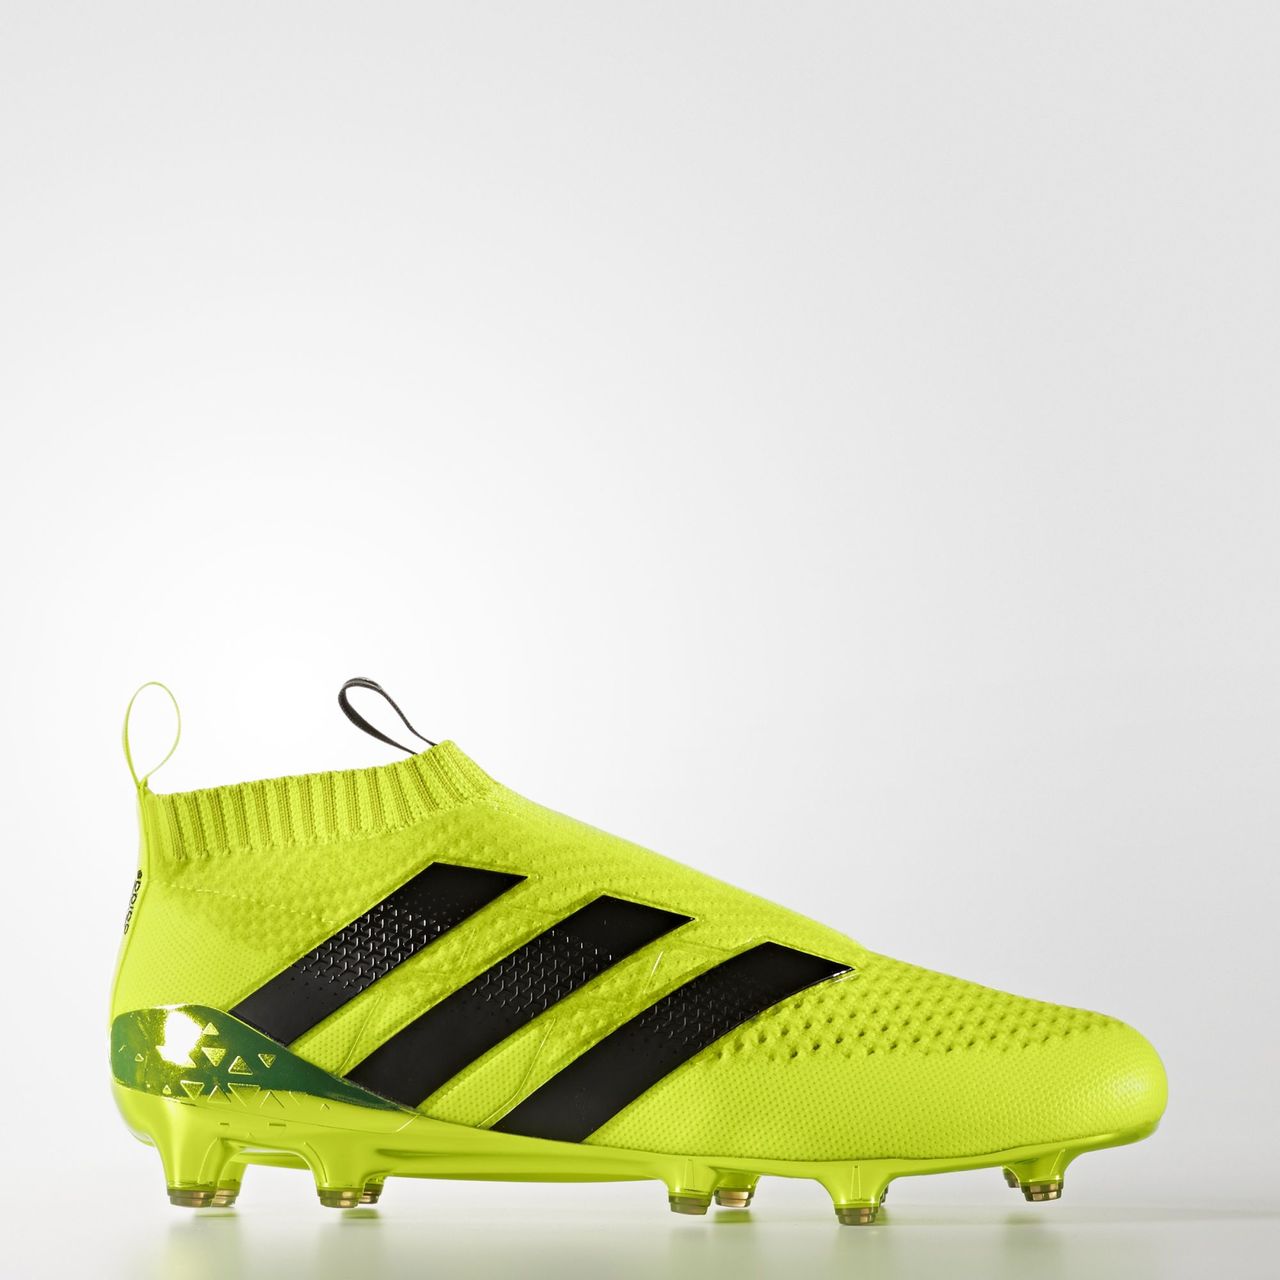 Adidas Ace 16+ Purecontrol Primeknit Firm Ground Boots - Speed of Light